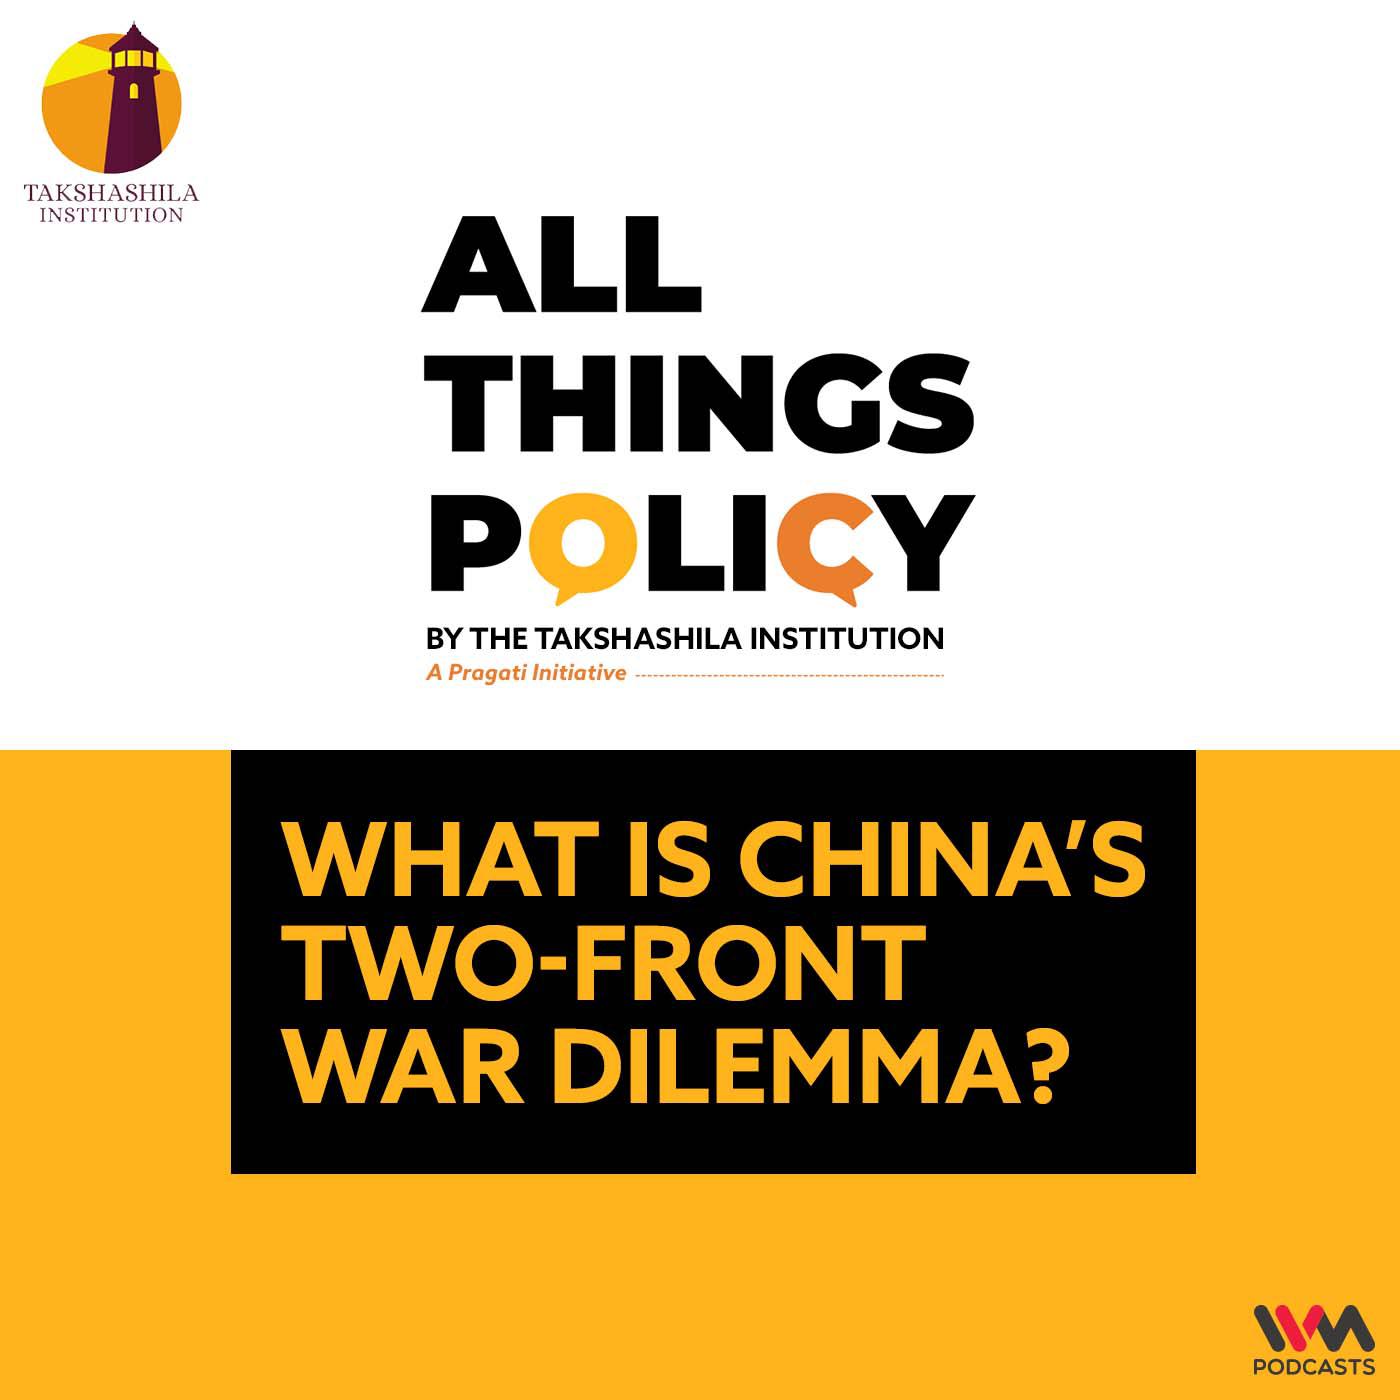 What is China’s two-front War Dilemma?